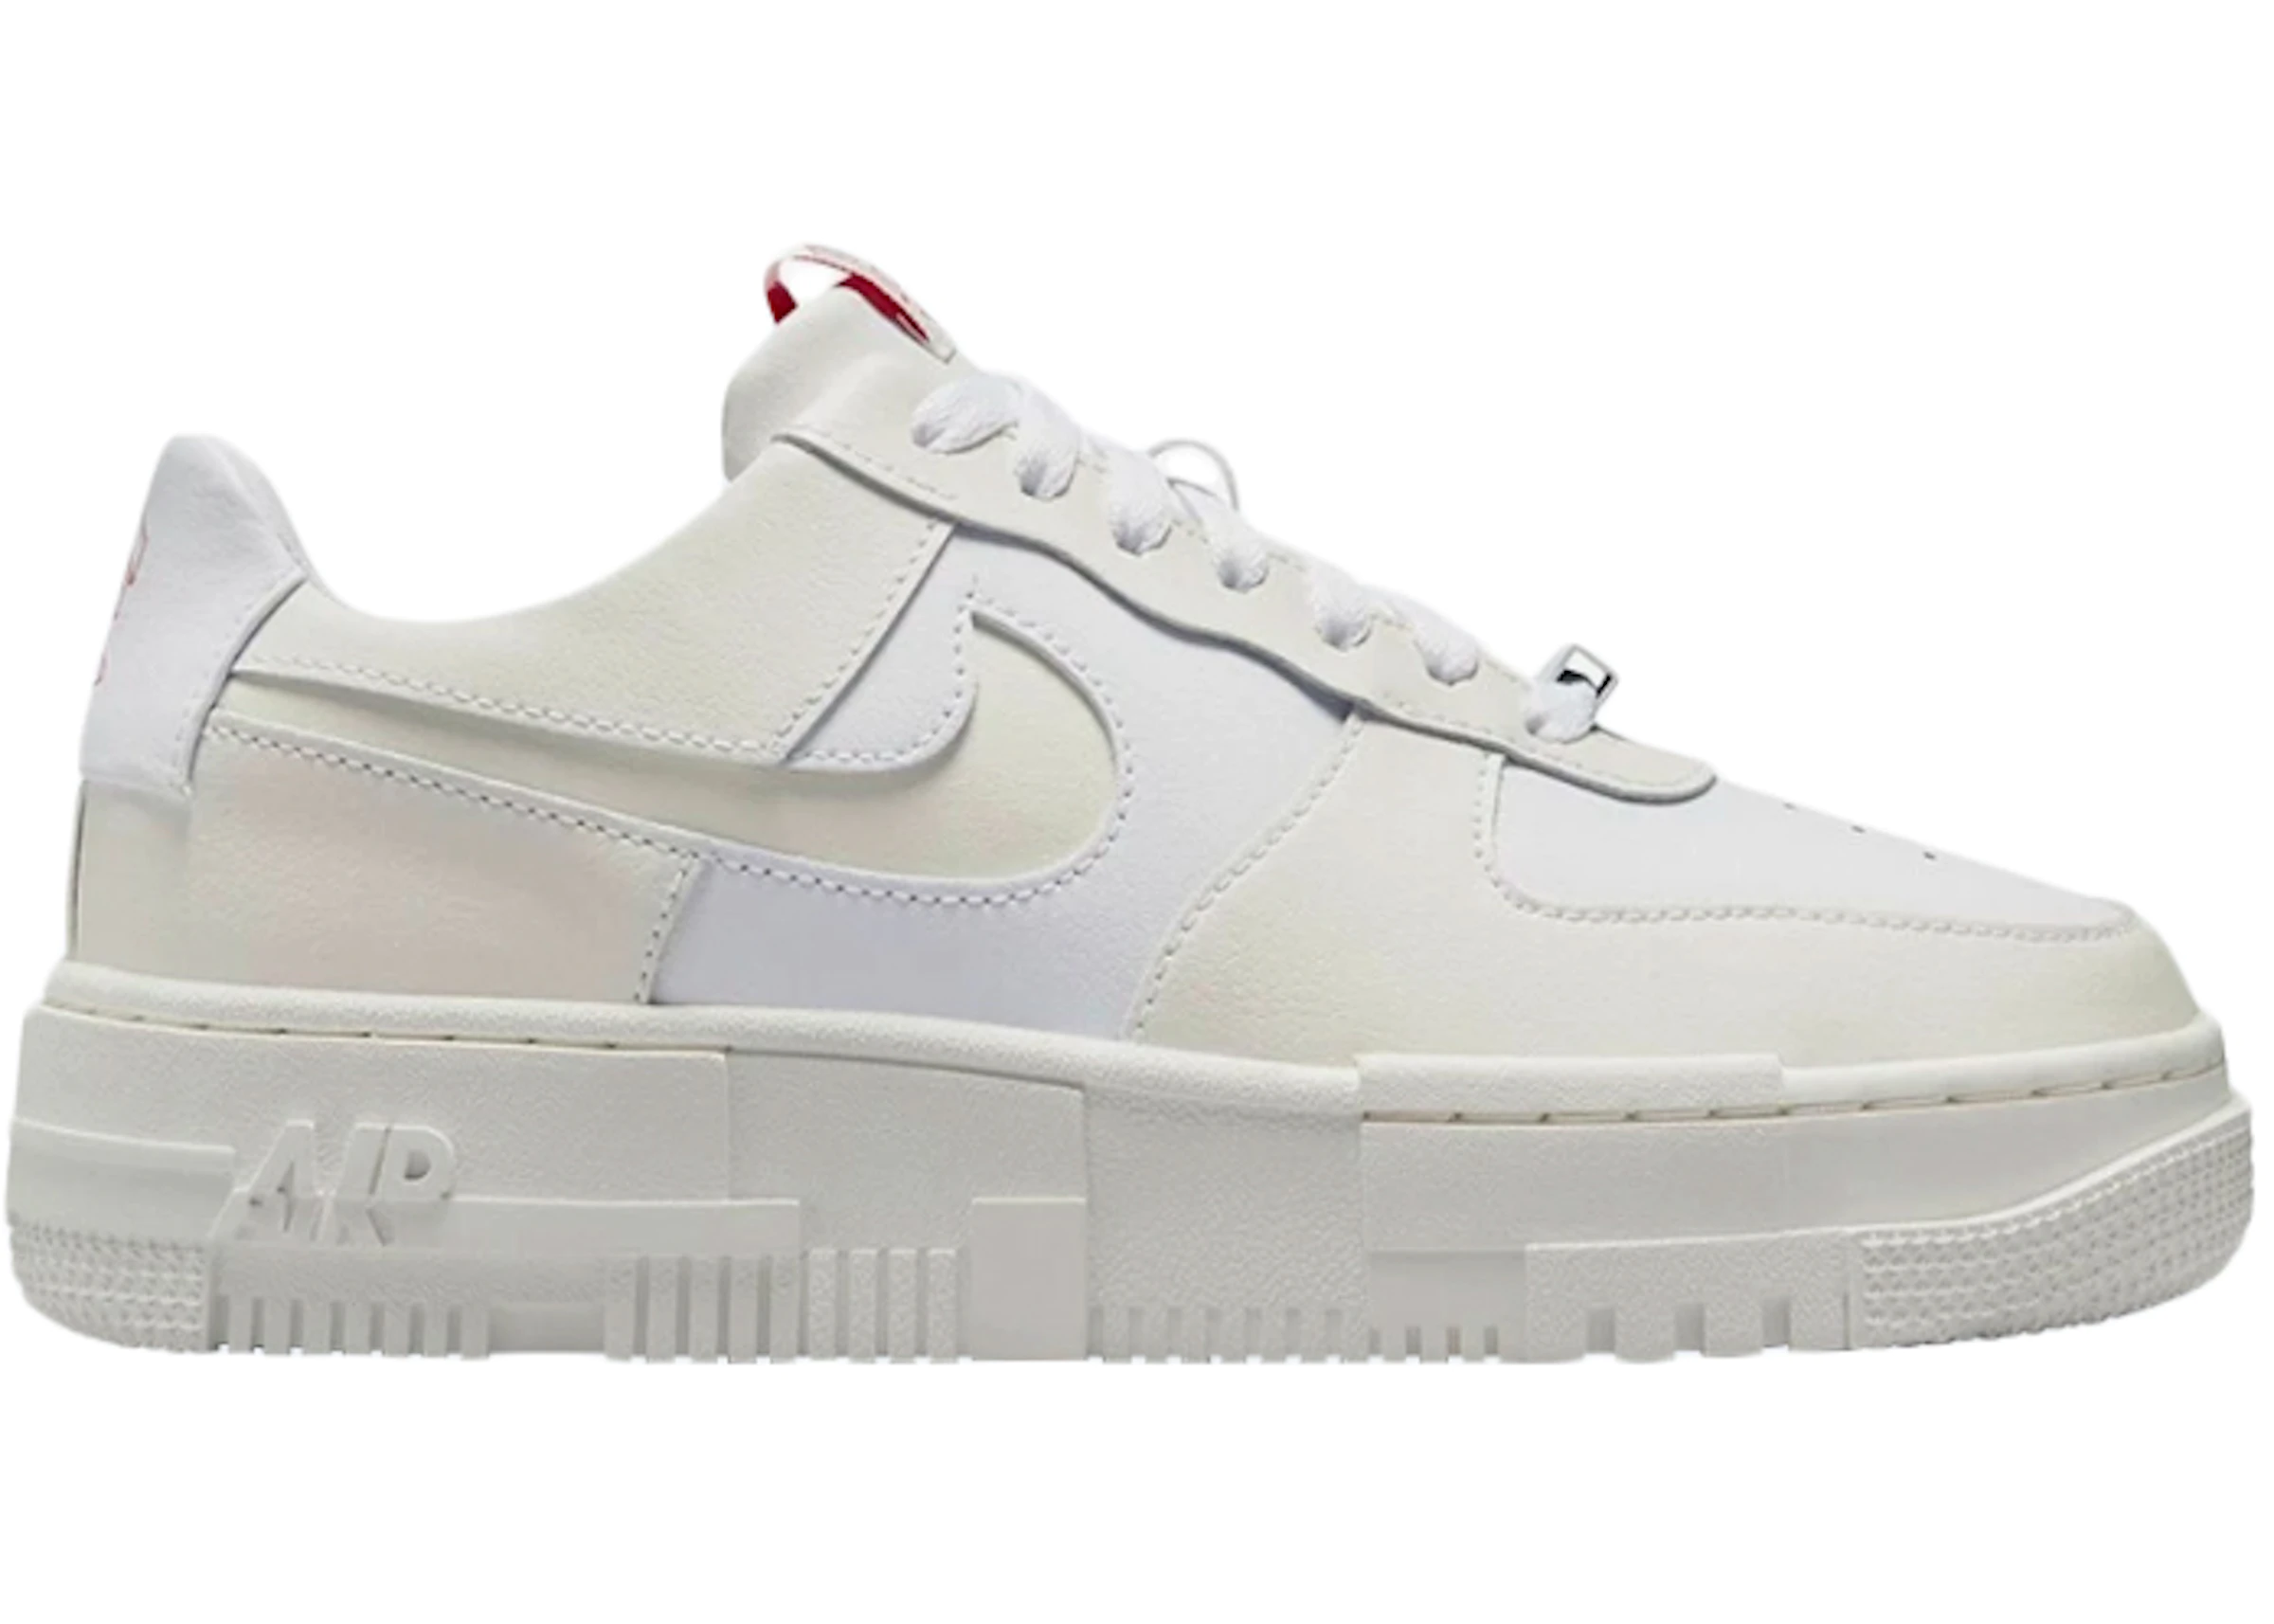 Think money transfer jump in Nike Air Force 1 Pixel Summit White Cream (W) - CK6649-105 - US